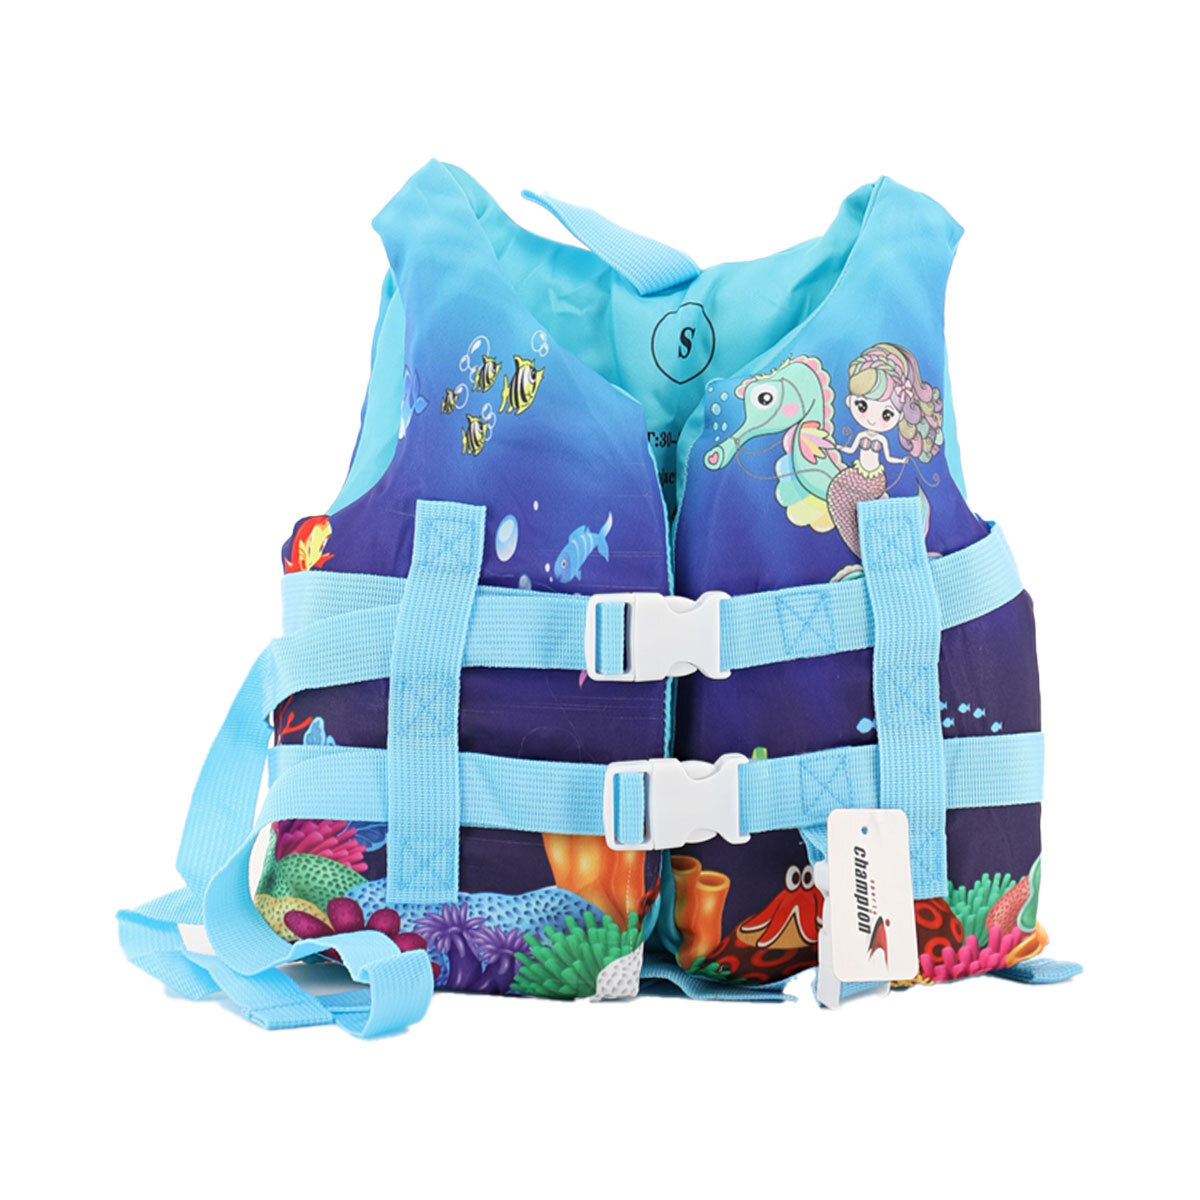 Sports Champion Teen Life Jacket LV300-S Small Assorted Color / Design